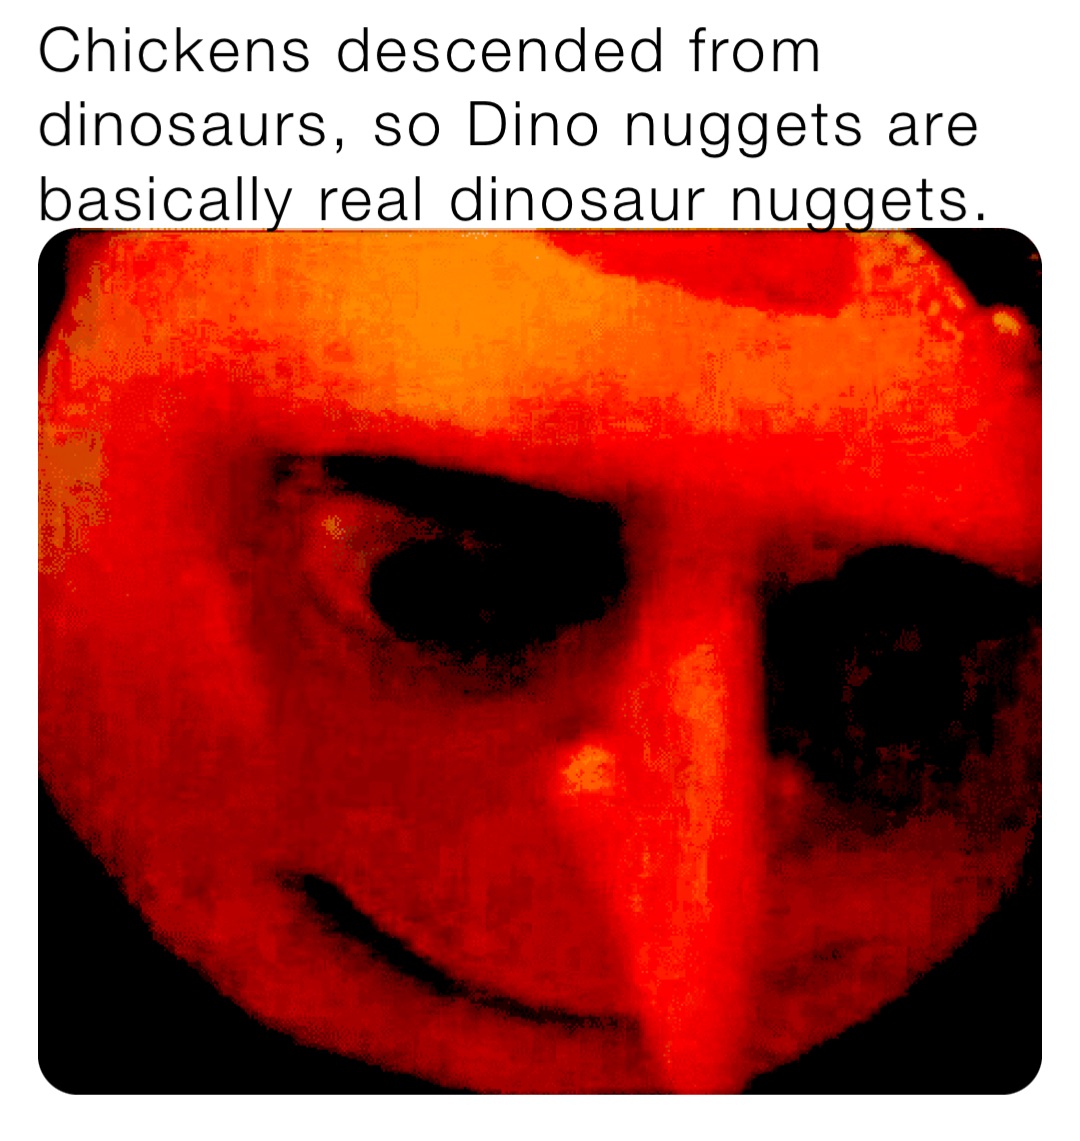 Chickens descended from dinosaurs, so Dino nuggets are basically real dinosaur nuggets.